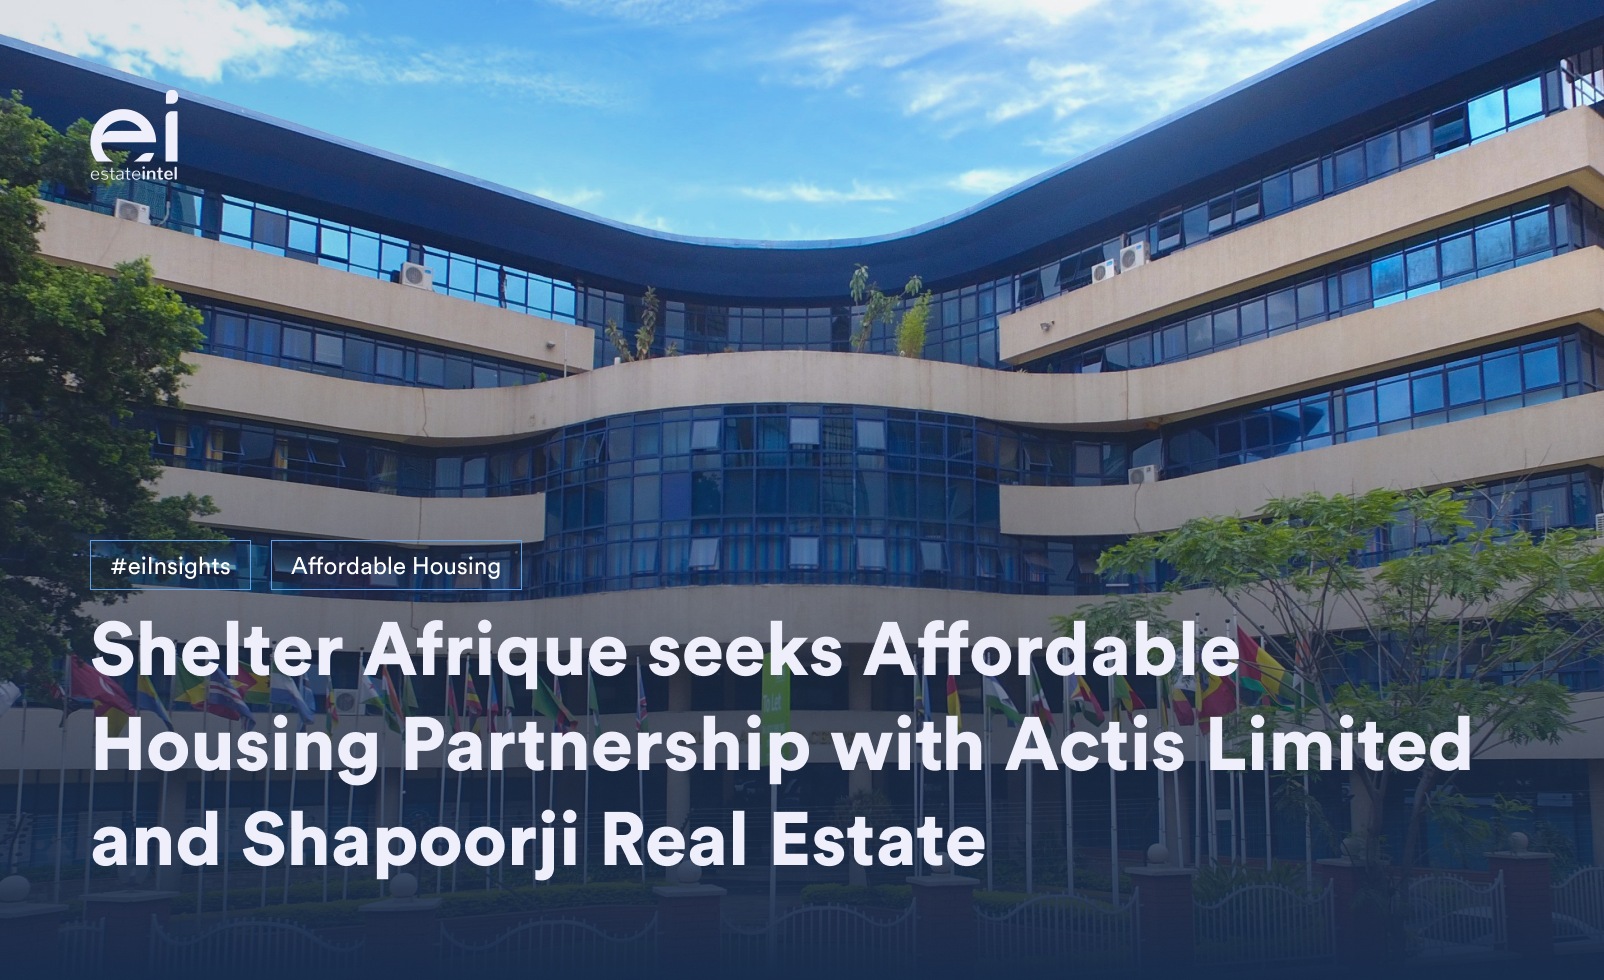 Shelter Afrique Limited To Partner With Actis Limited and Shapoorji Real Estate To Provide Affordable Housing Projects in Africa